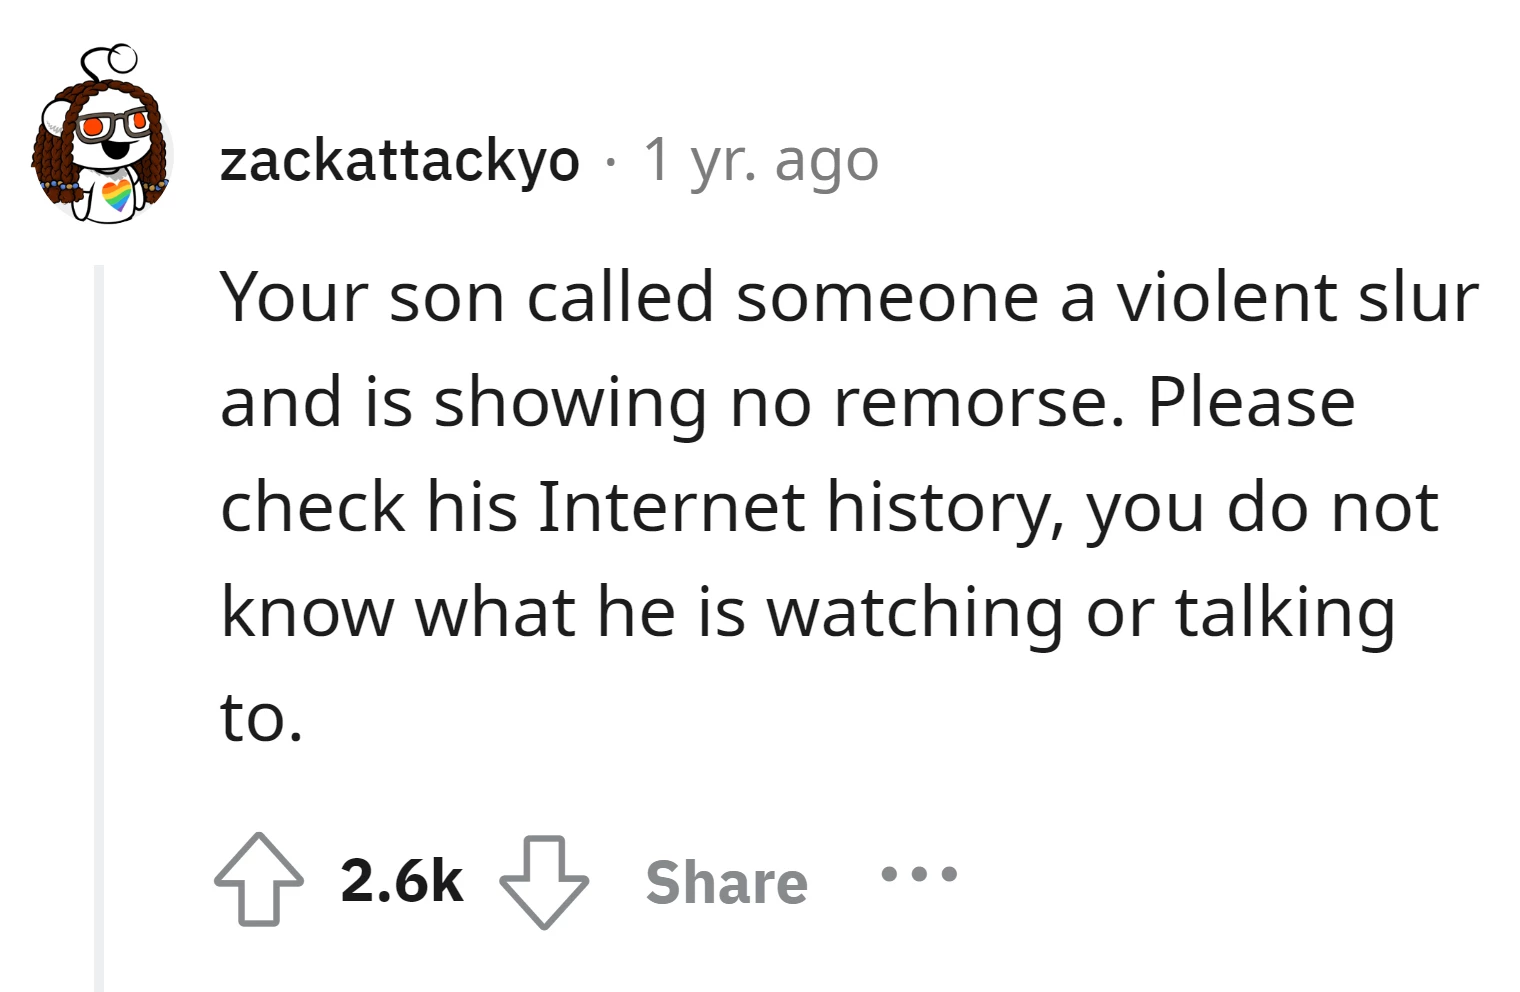 OP should check the son's internet history